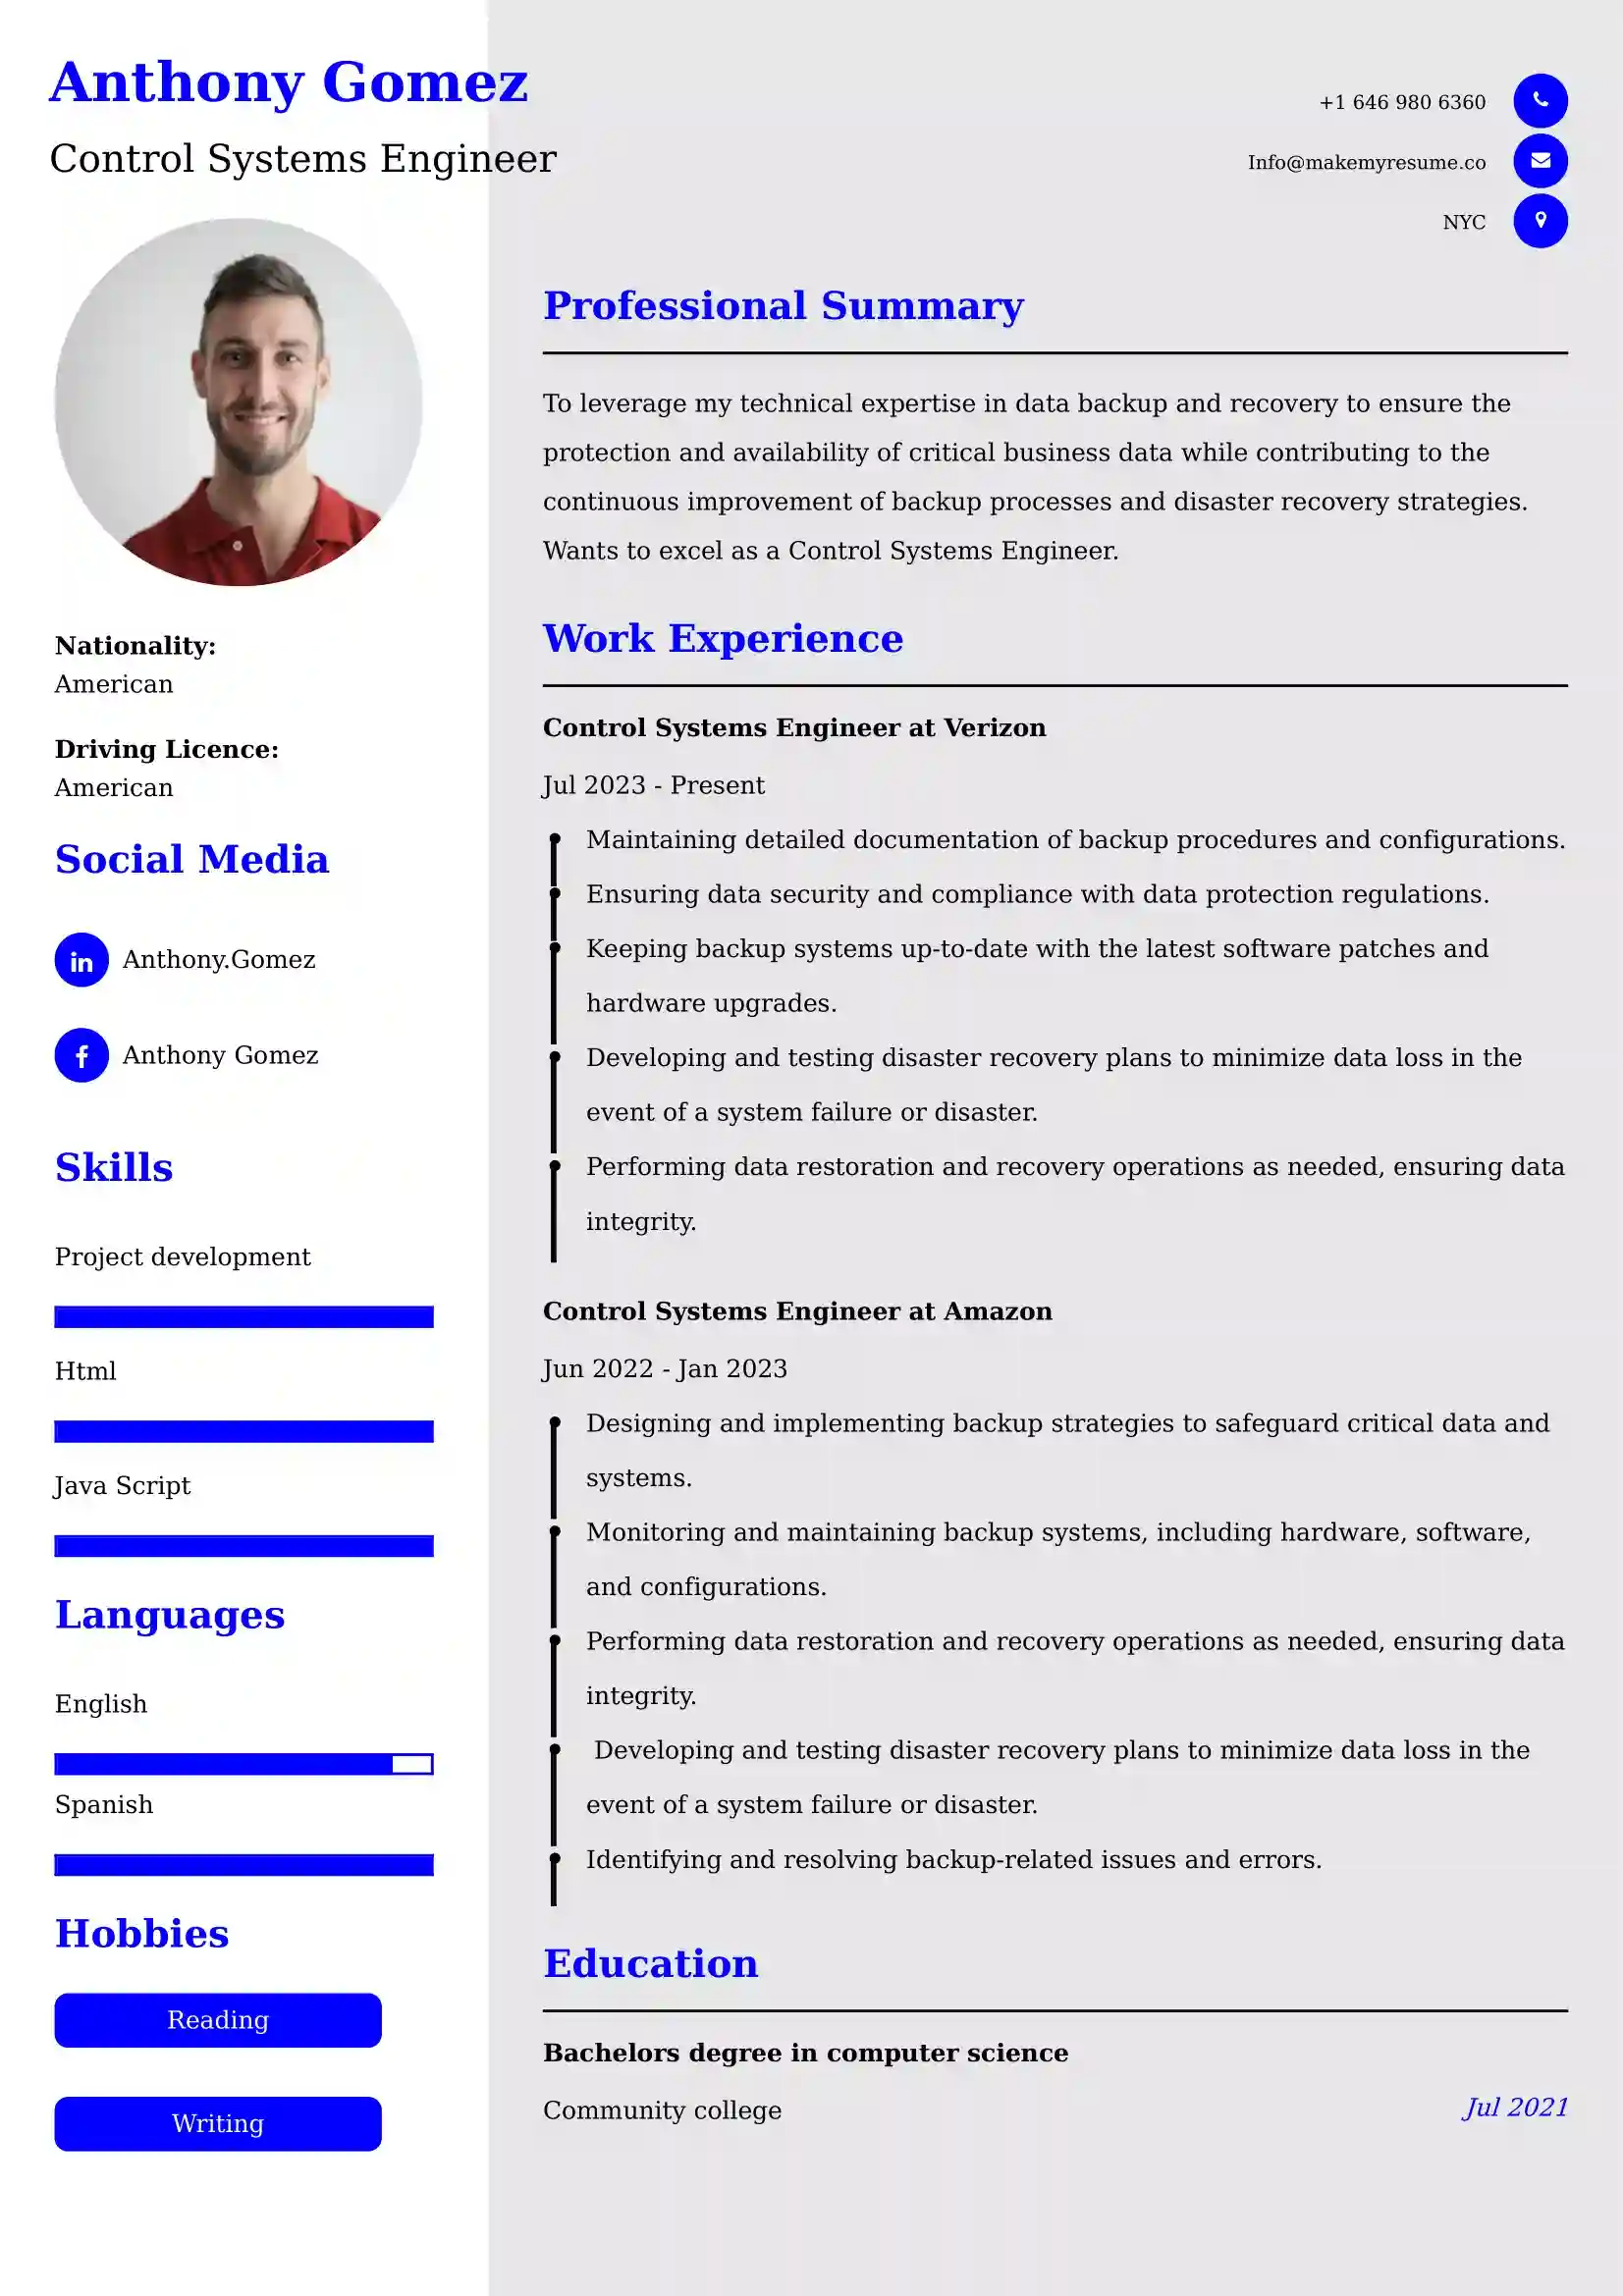 Control Systems Engineer Resume Examples - Brazilian Format, Latest Template